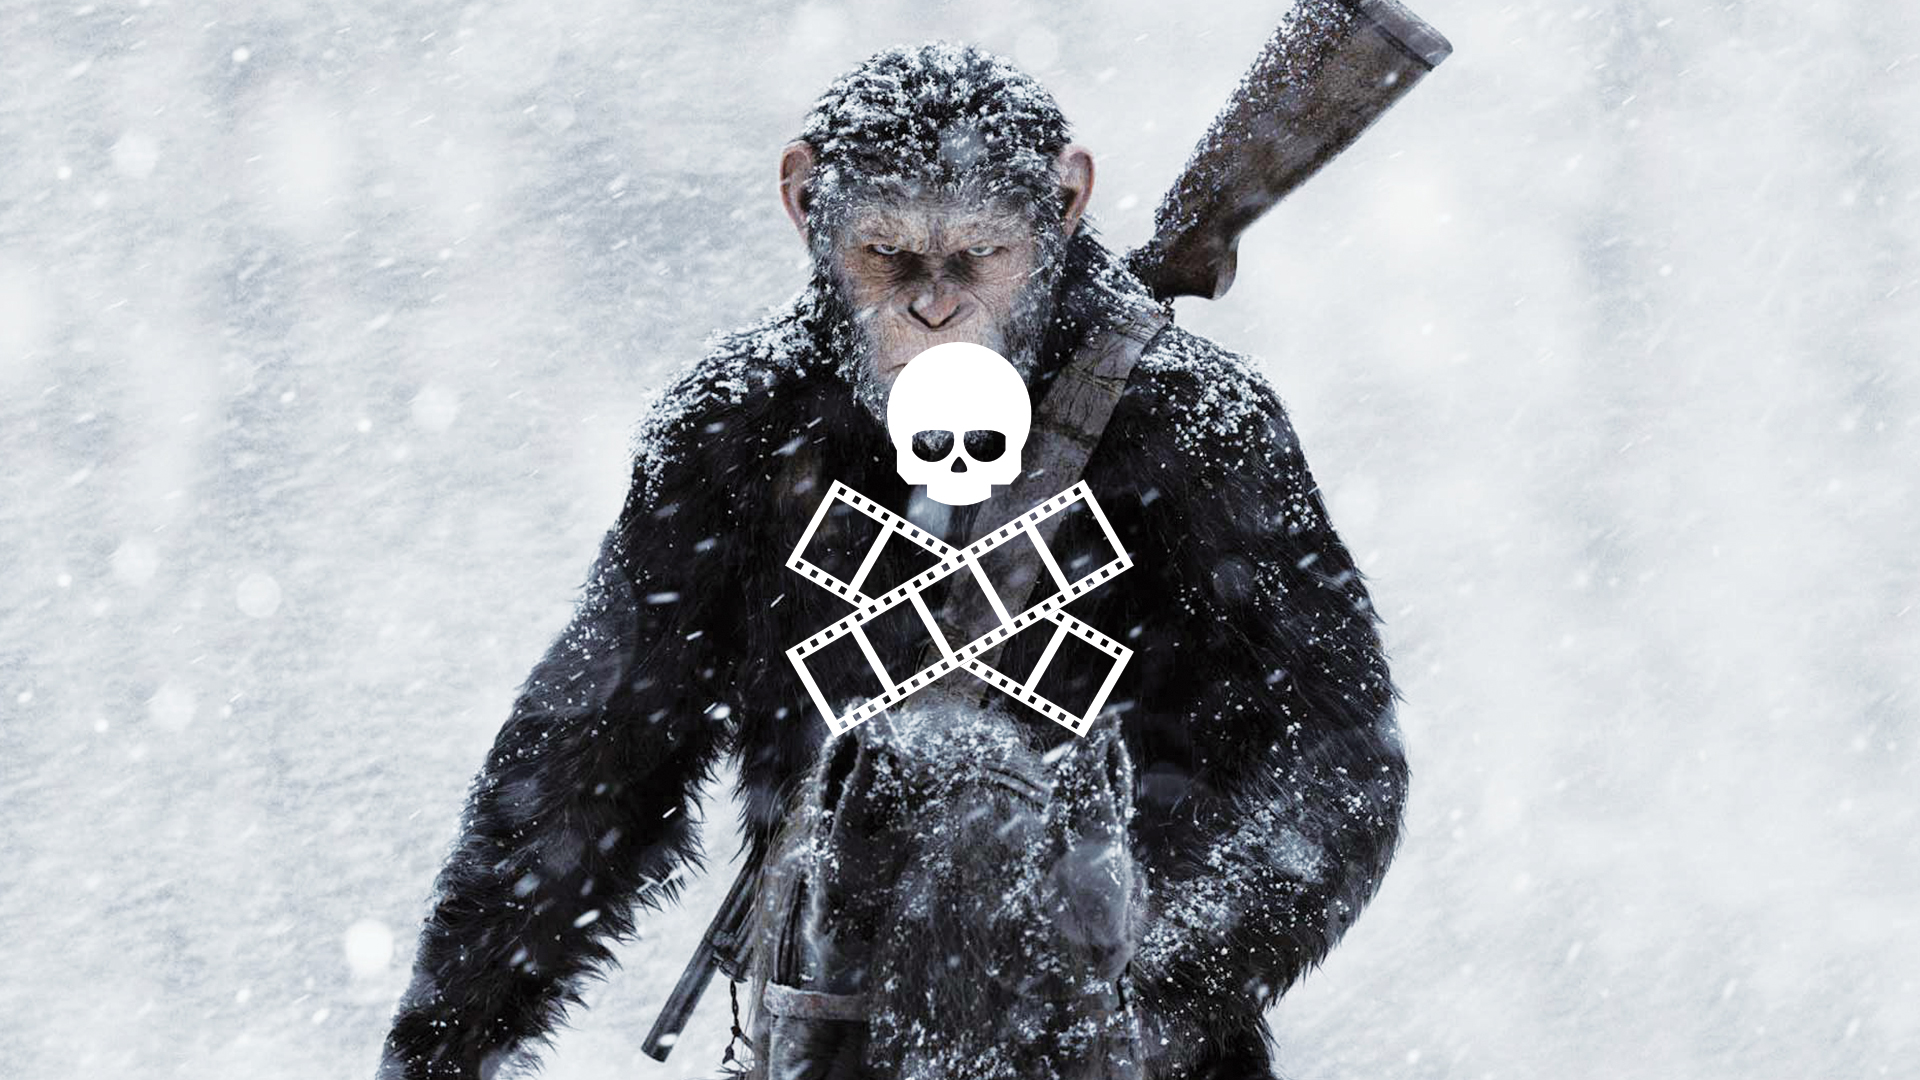 107. War for the Planet of the Apes